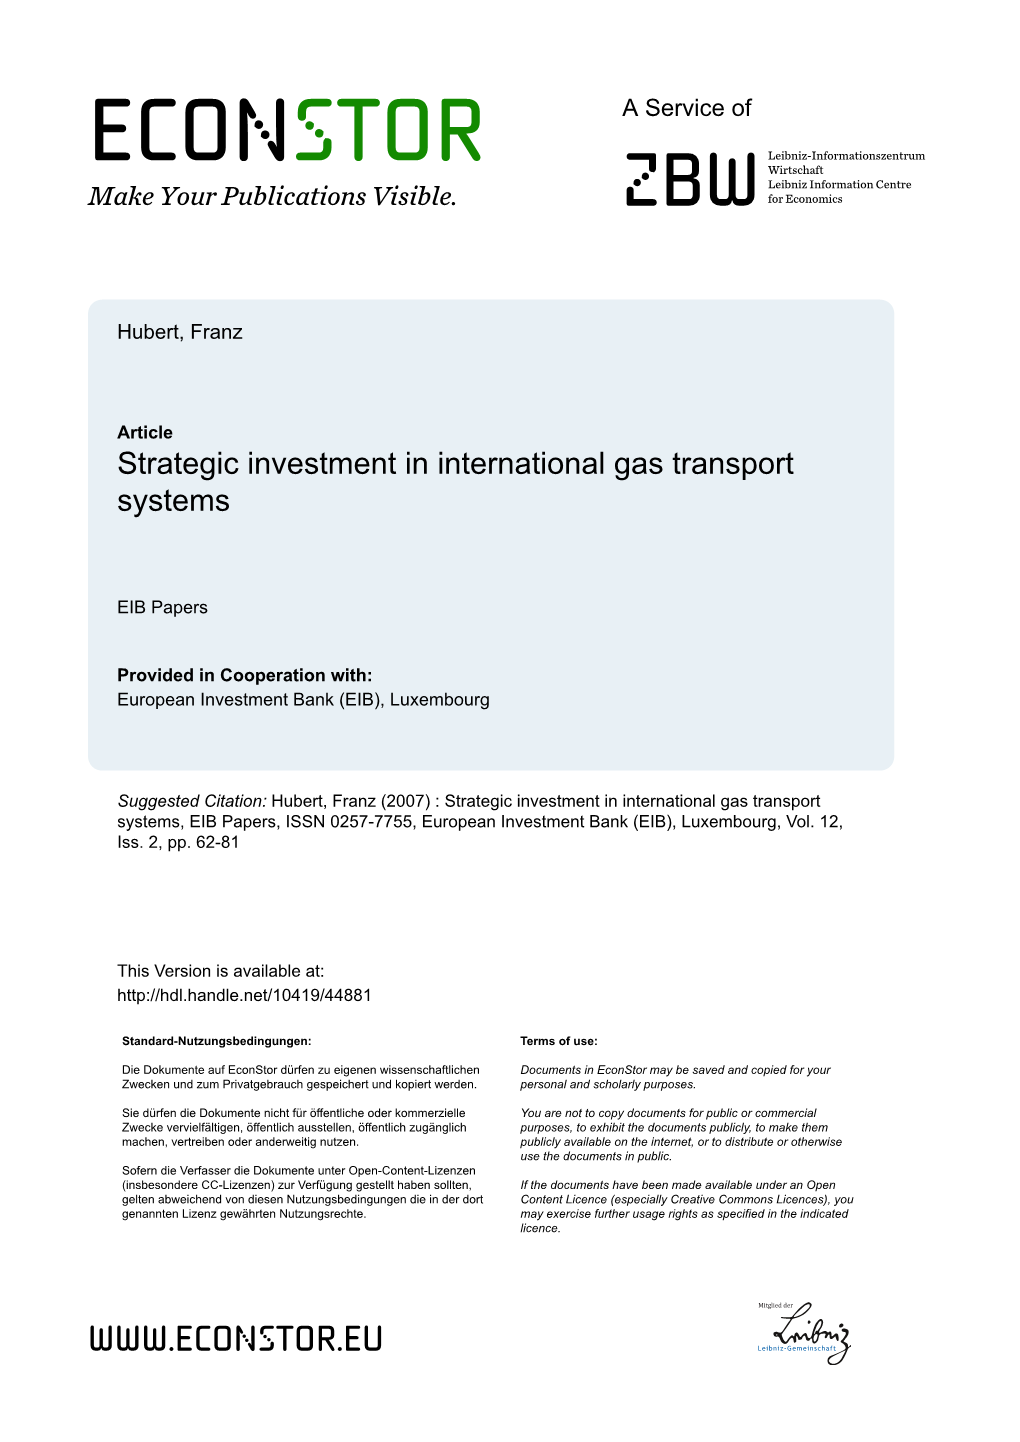 Strategic Investment in International Gas Transport Systems